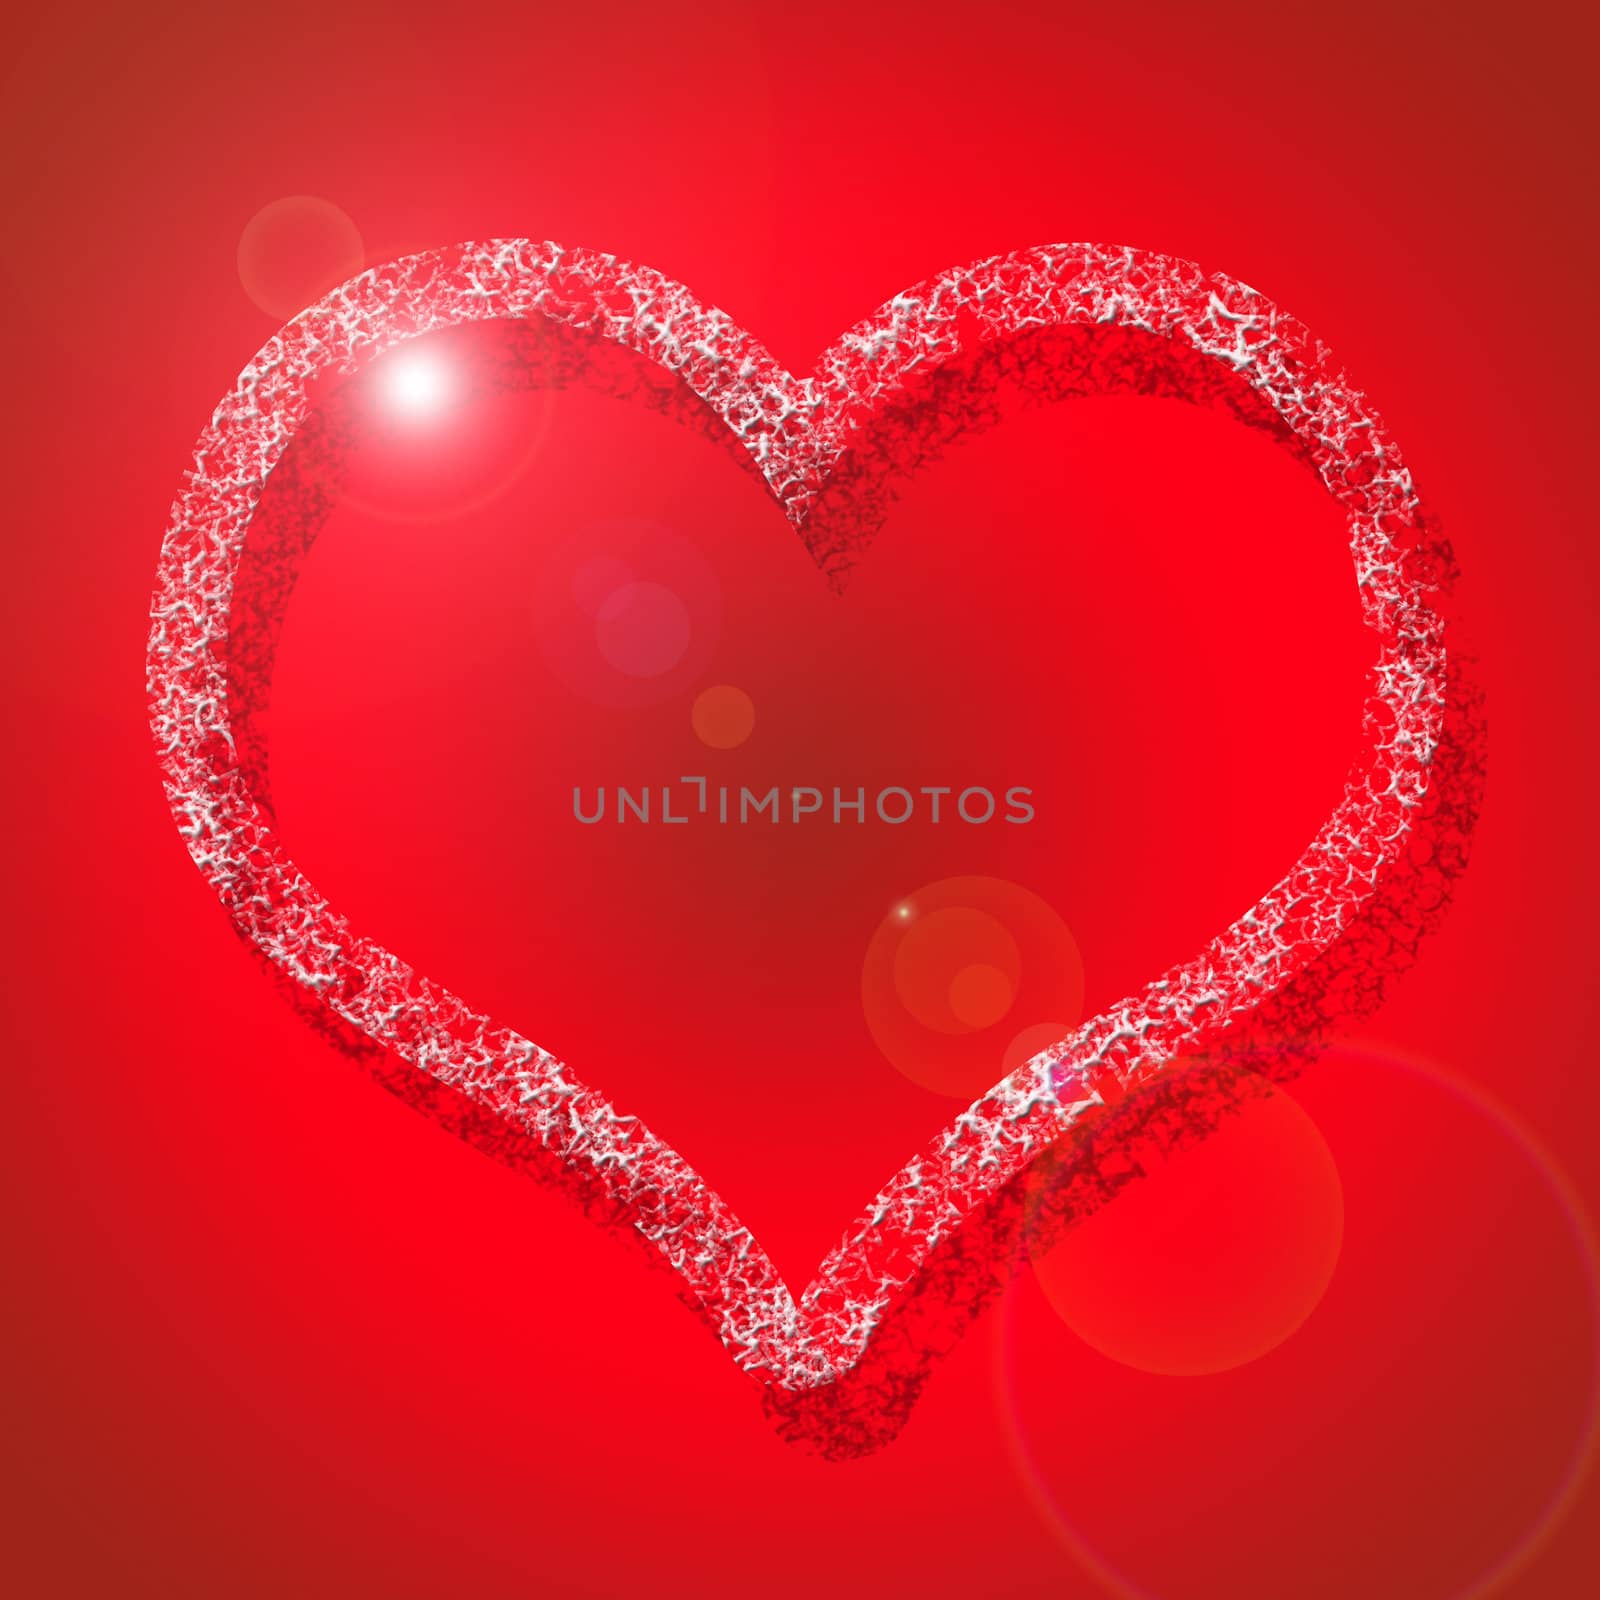 illustration of the heart over red background with light effects